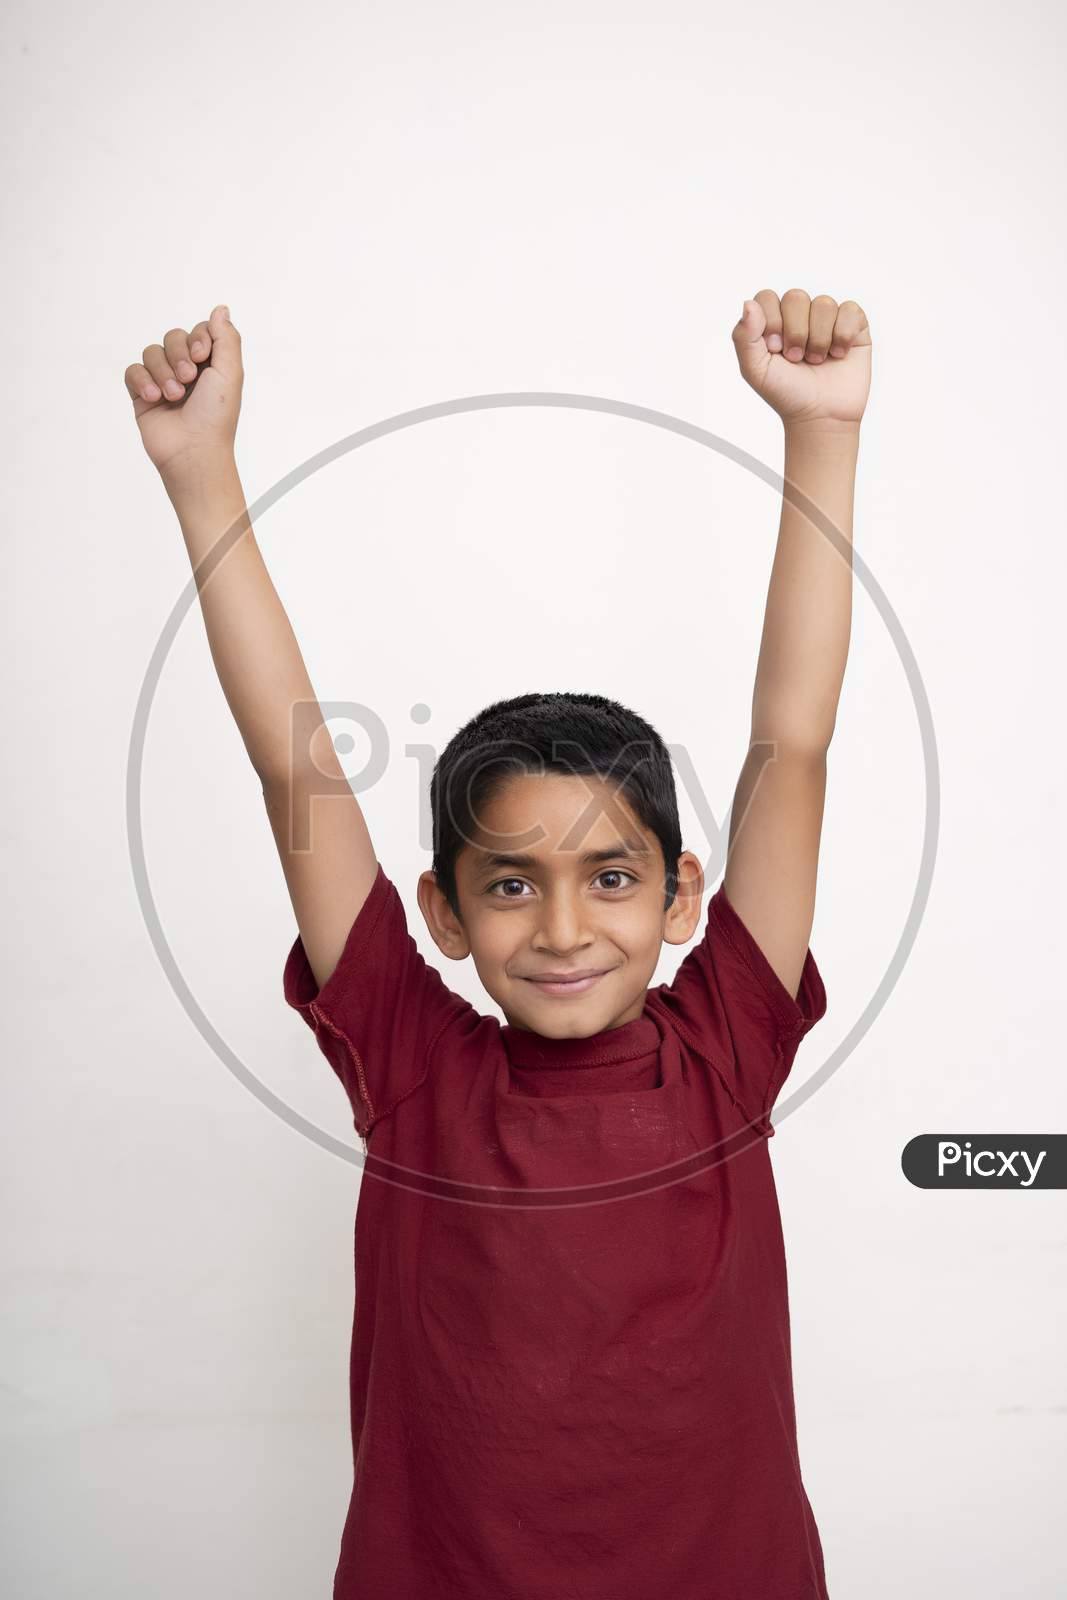 Young Indian Kid Showing Joy Expression With His Arms In The Air Standing On A White Isolated Background